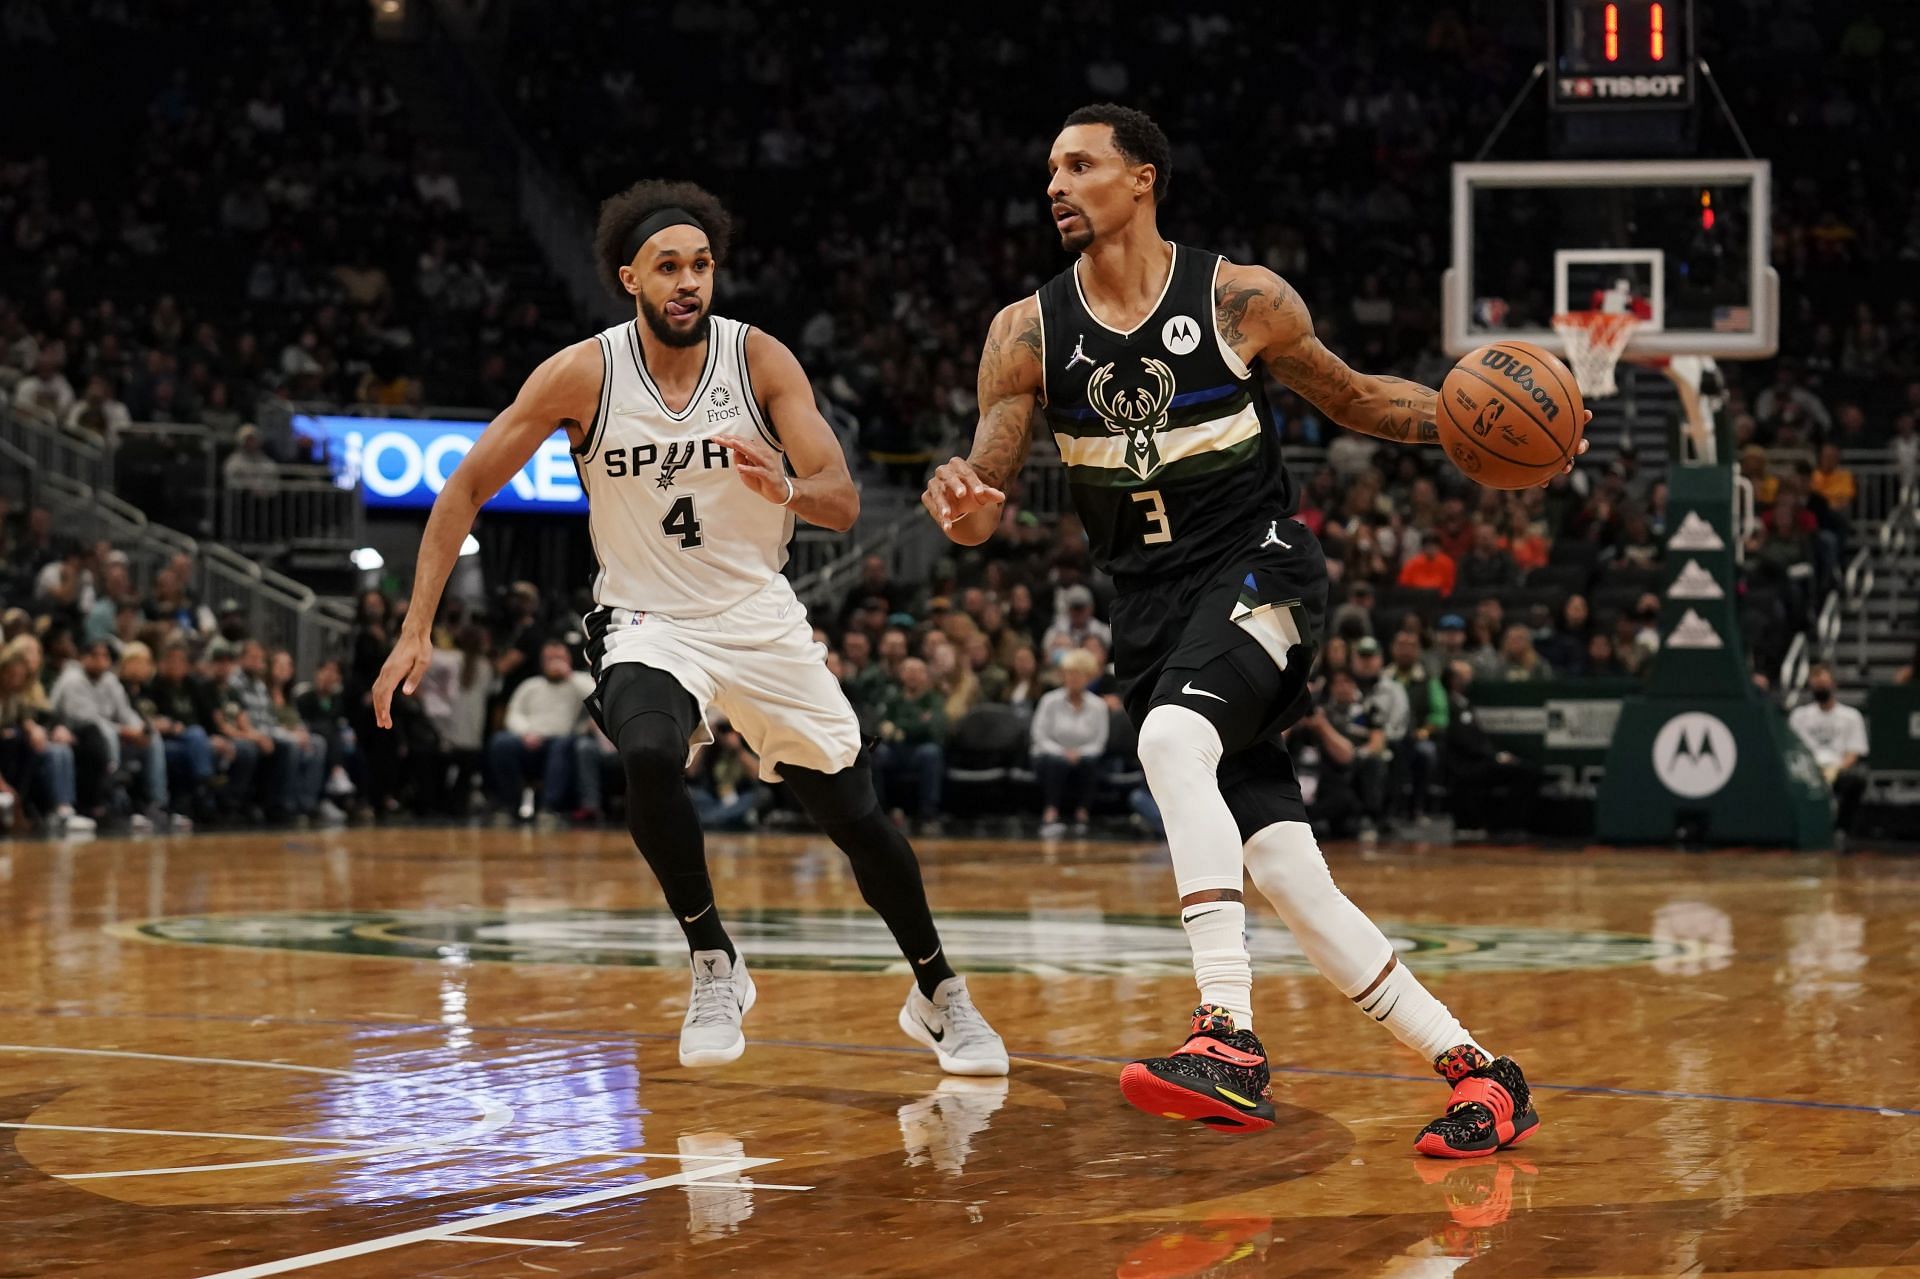 The Milwaukee Bucks suffered a loss to the New York Knicks on Friday